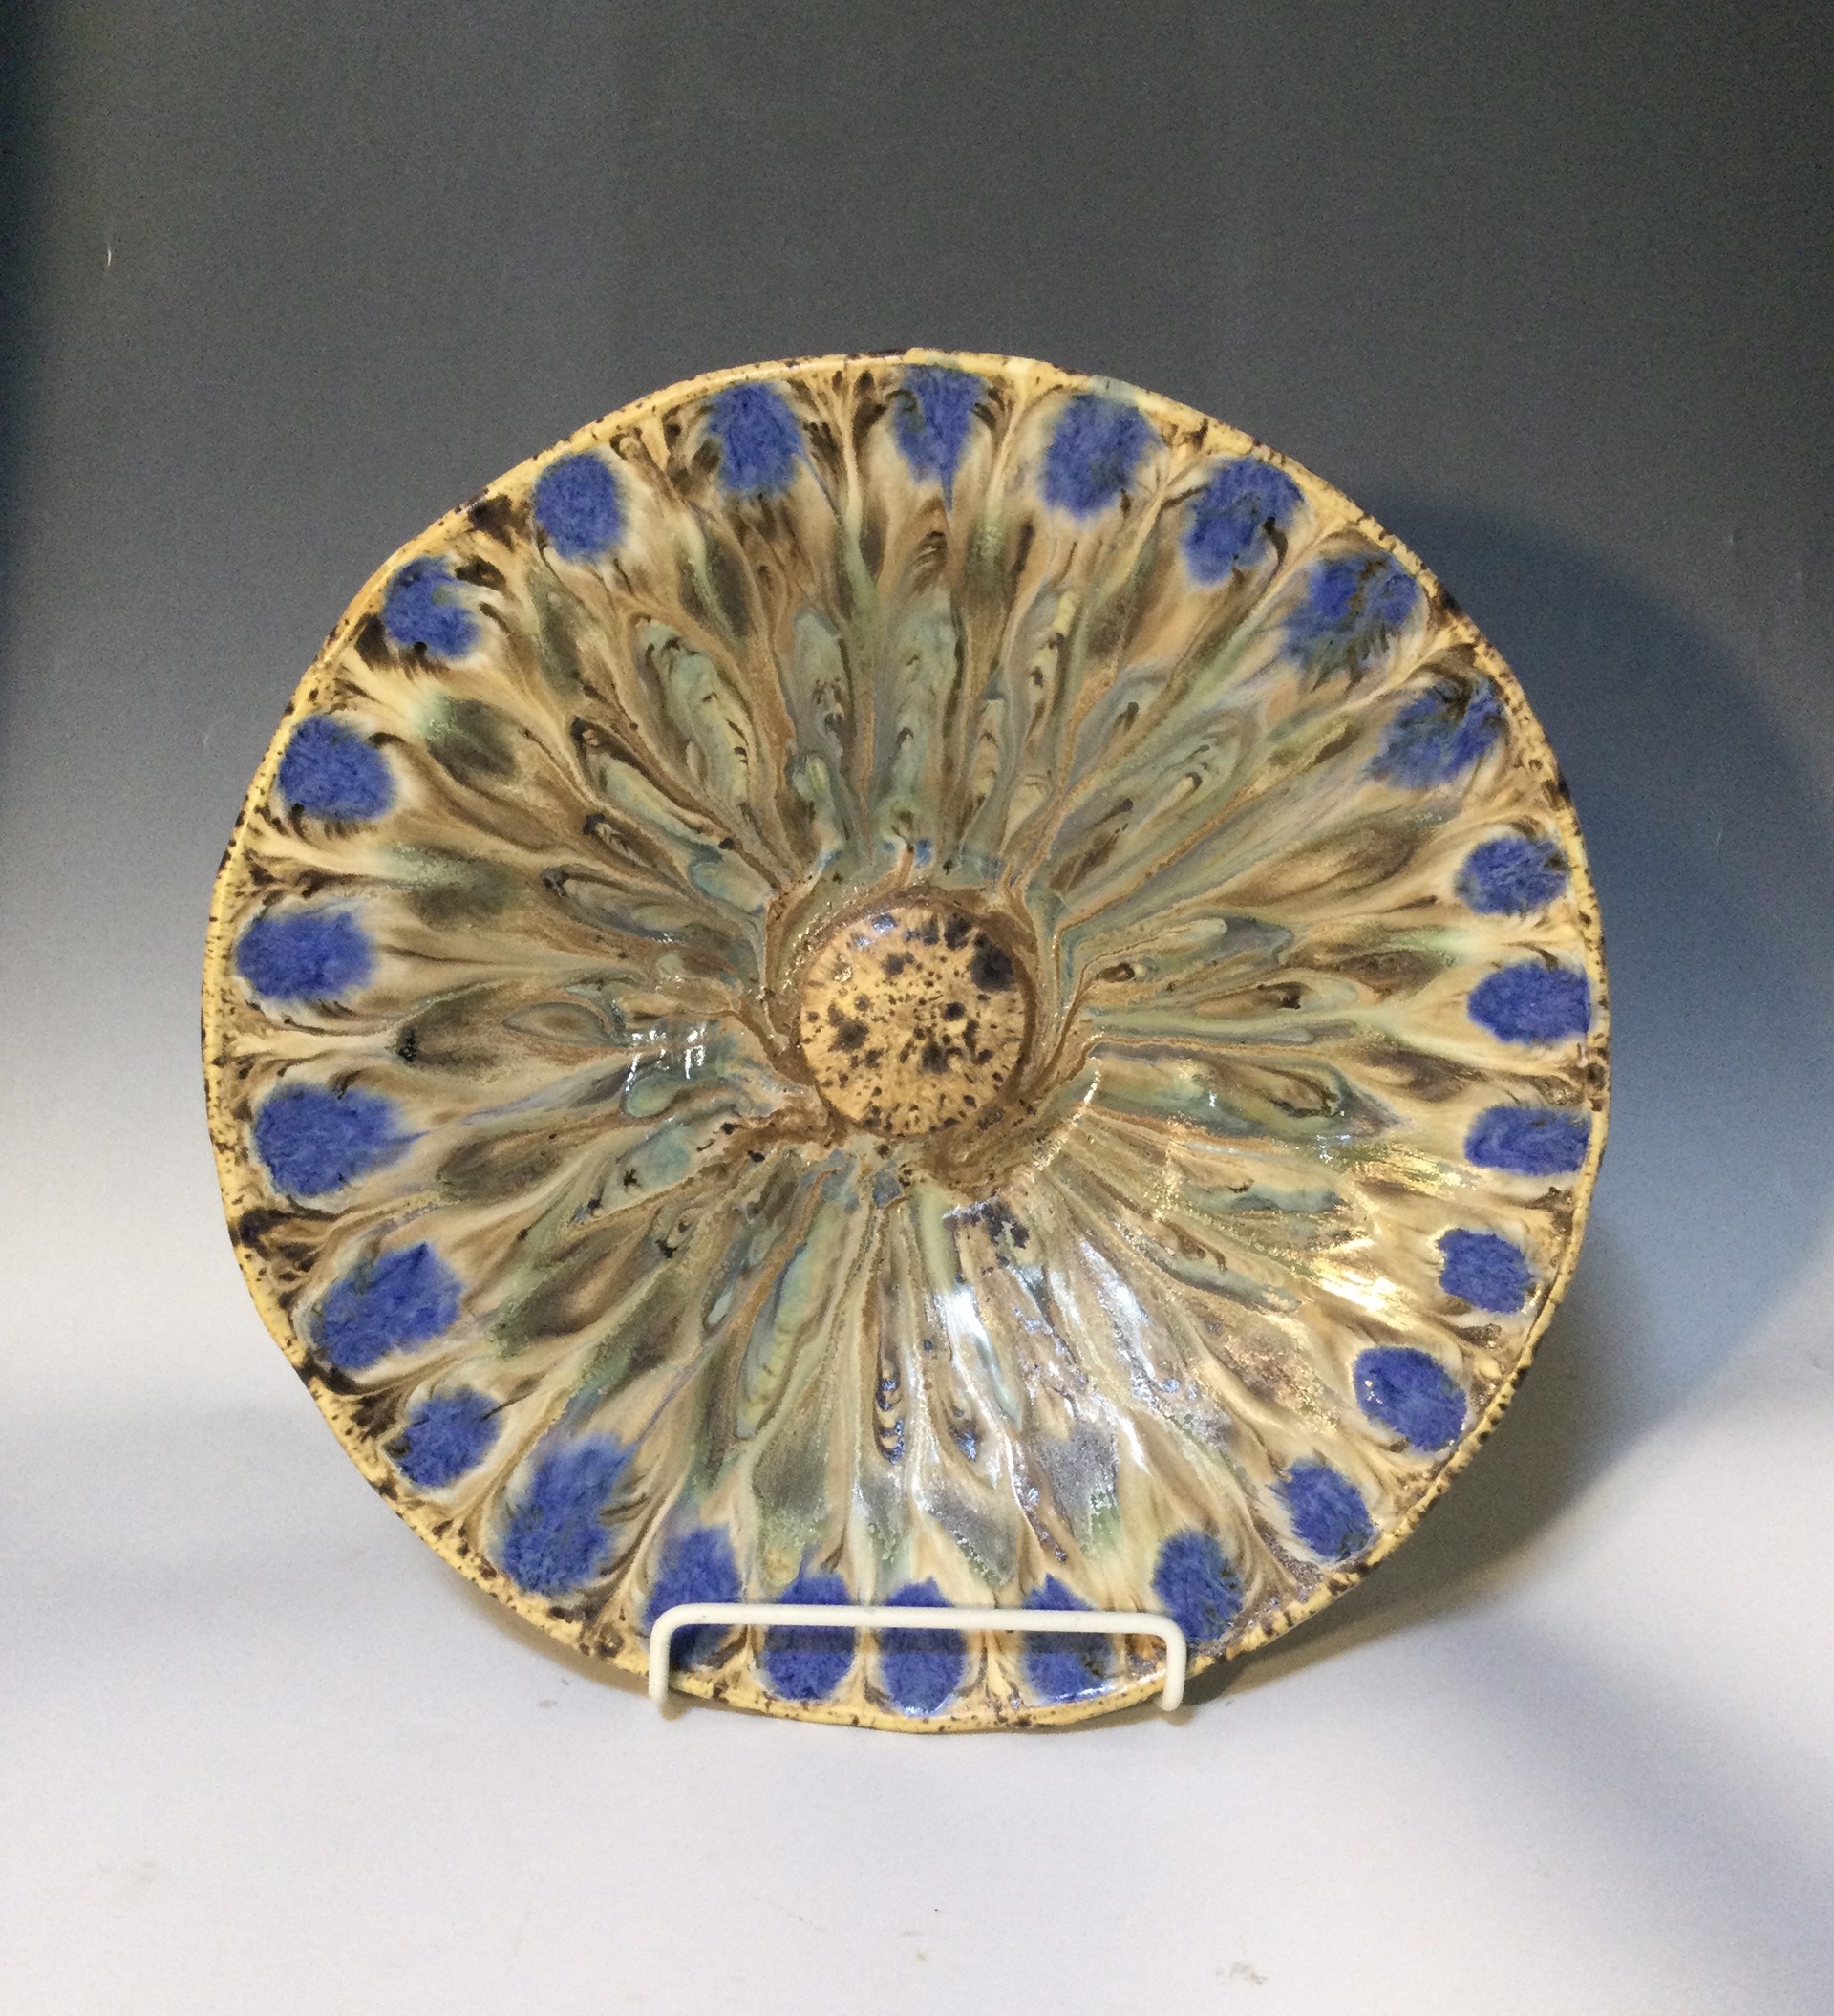 Peacock Bowl by Anna M. Elrod